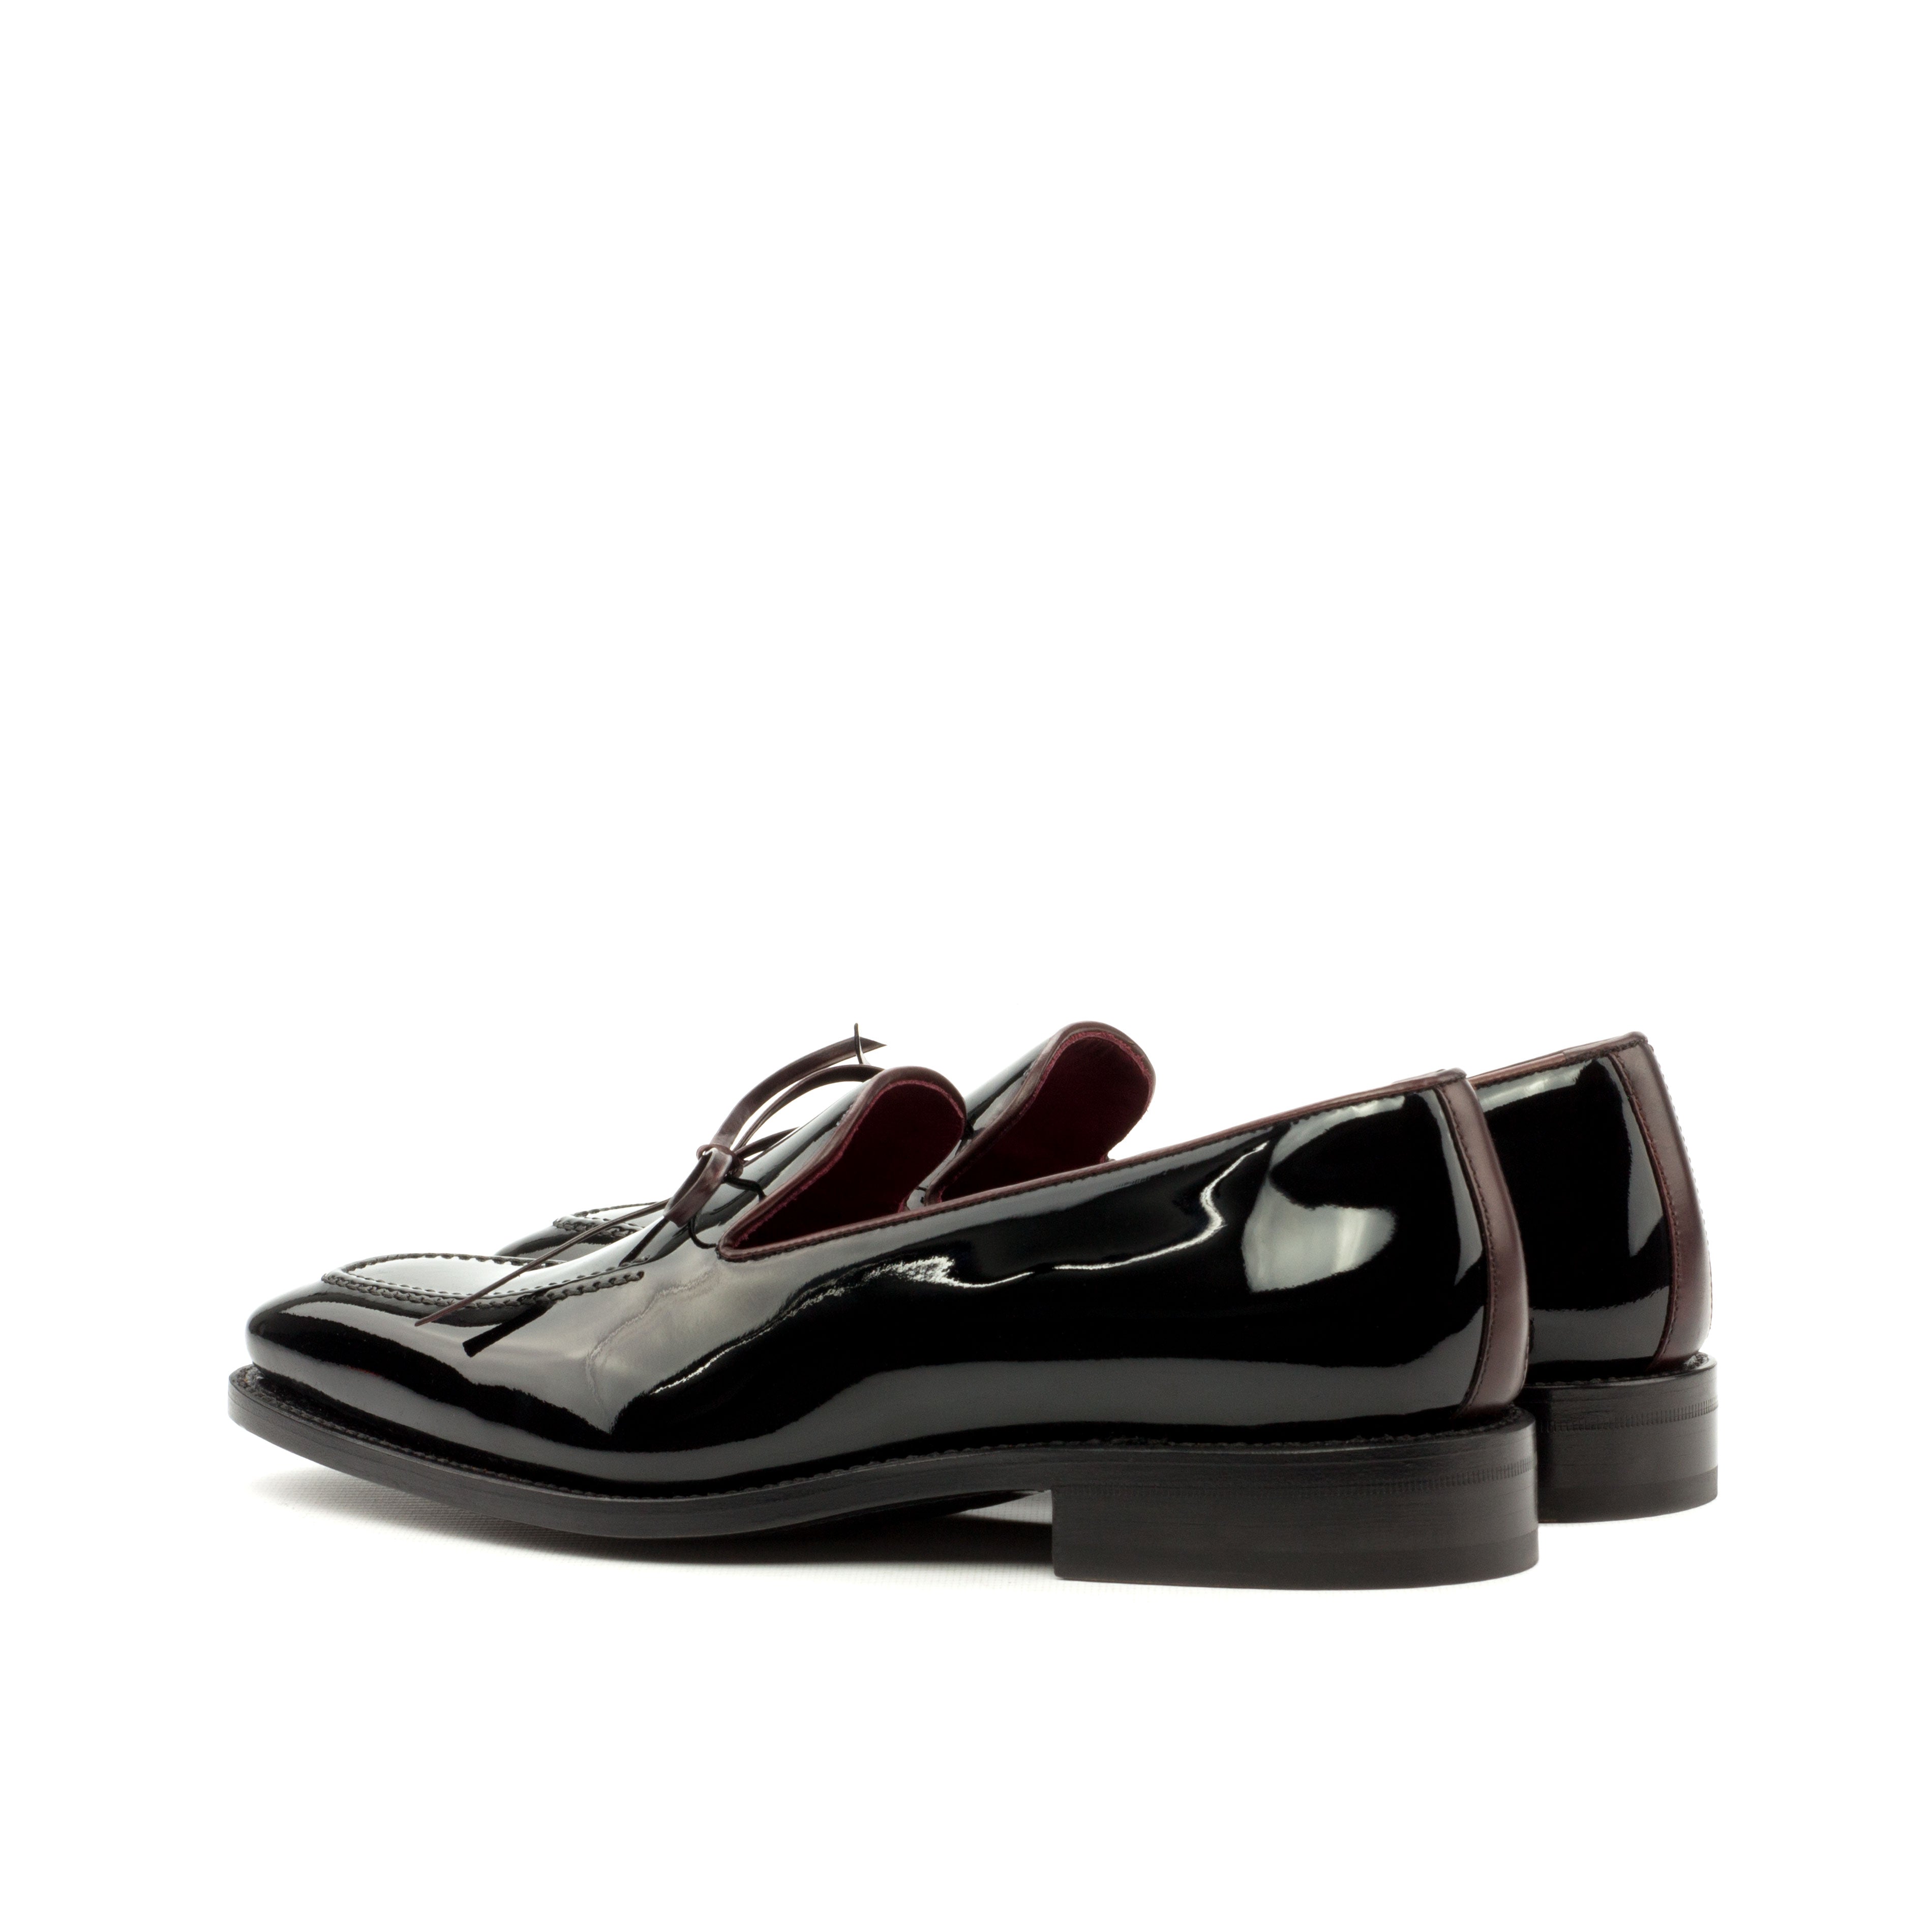 Black Patent Leather Loafer